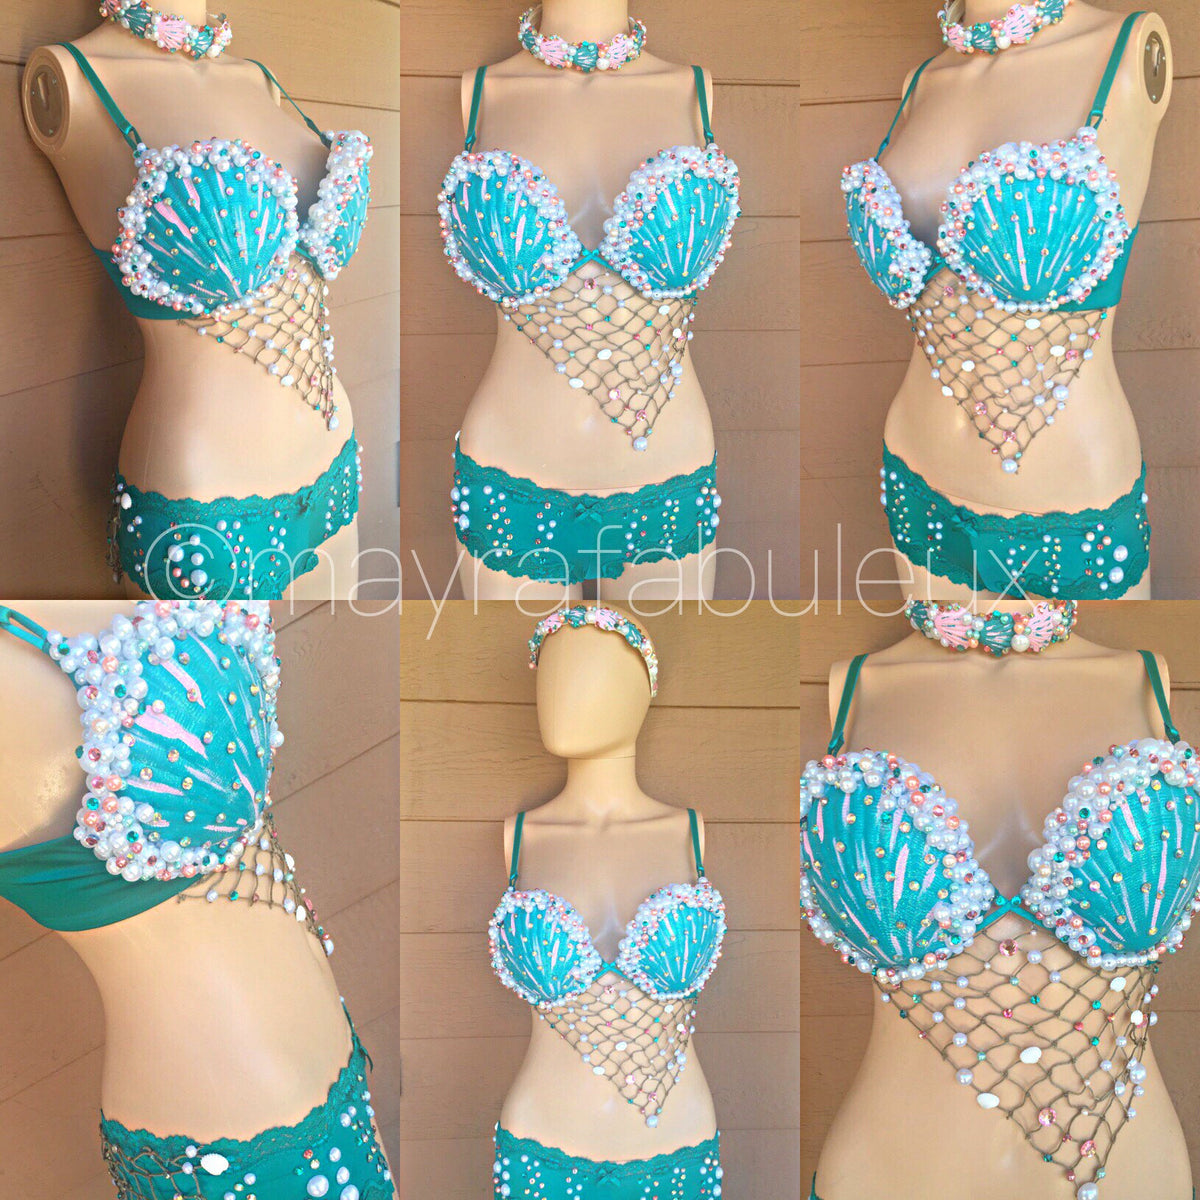 Bubble Gum Shells Mermaid Bra and Bottoms Rave Outfit, Includes